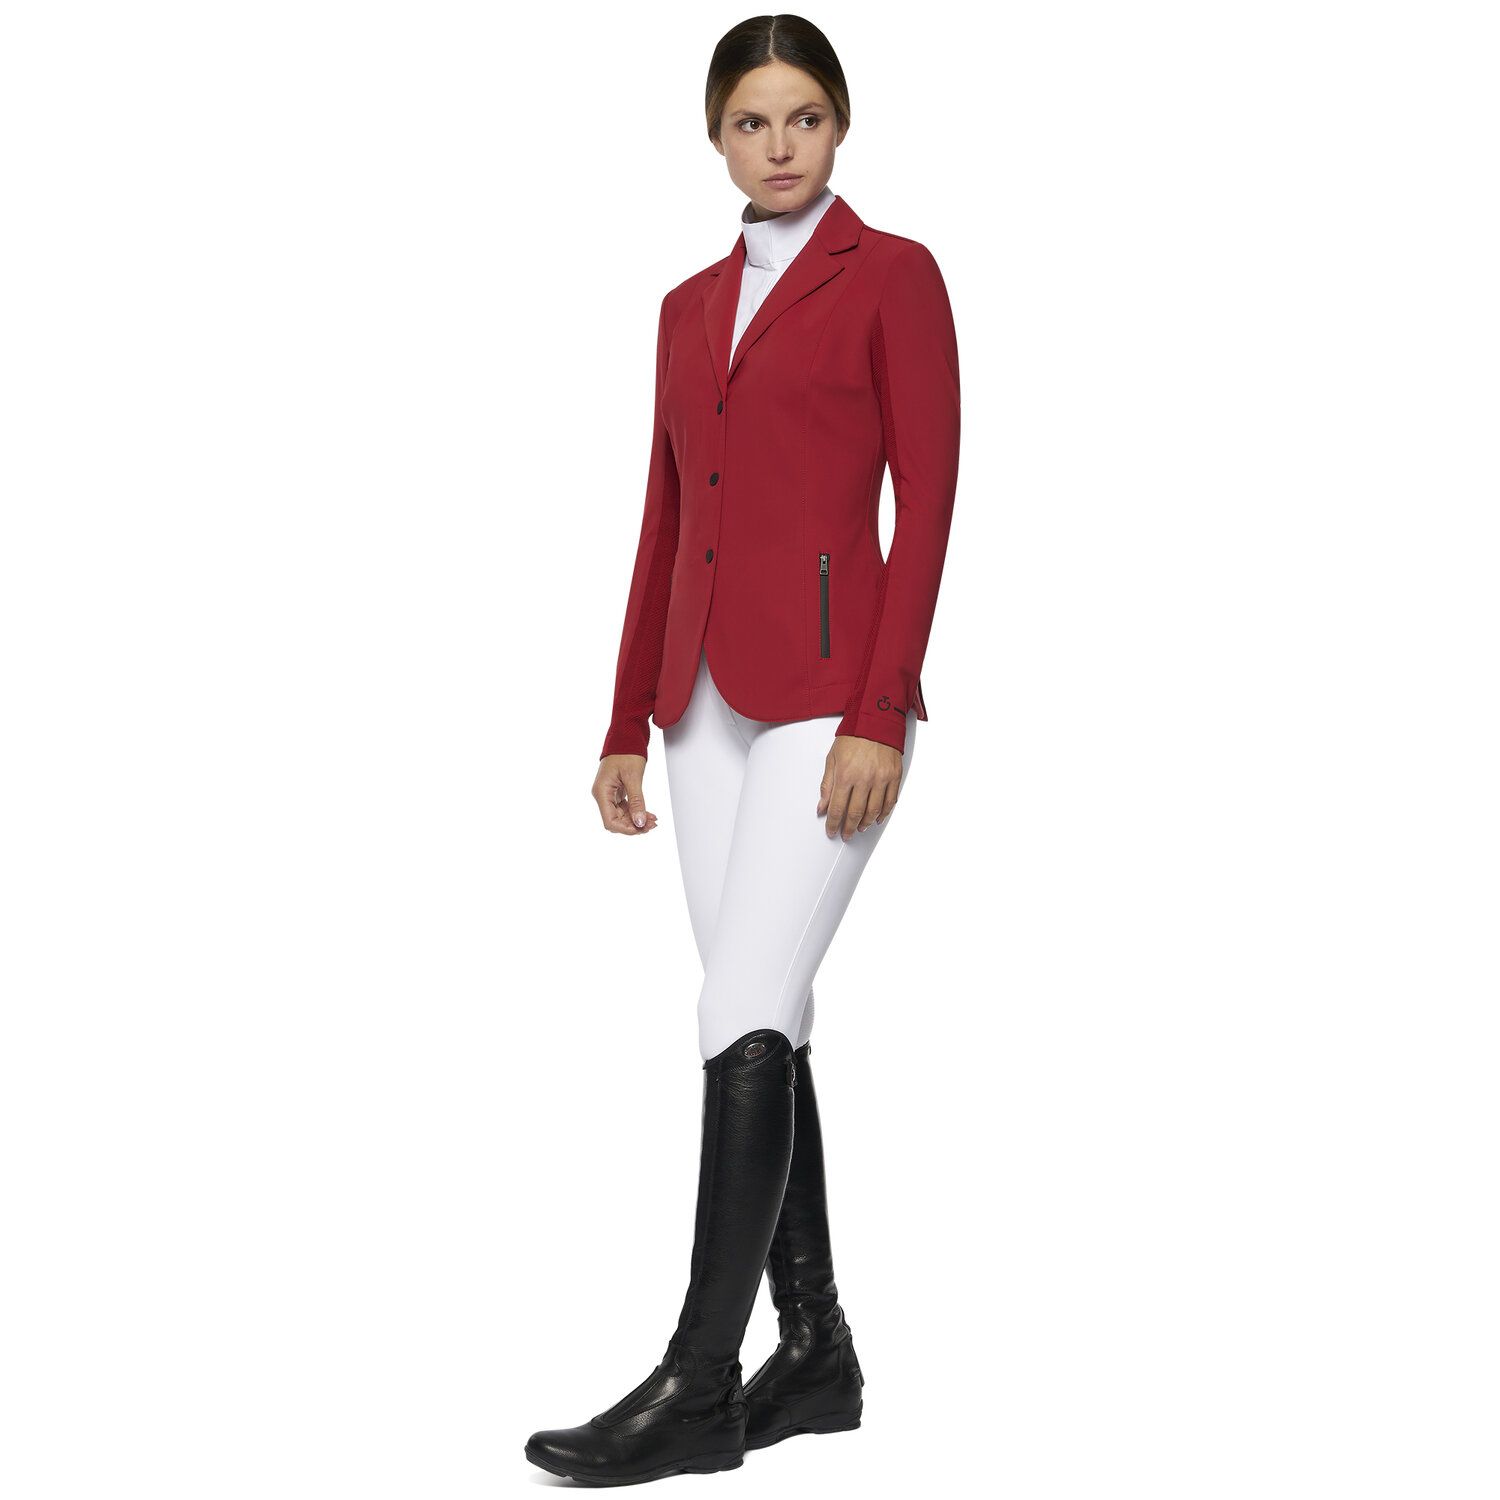 Cavalleria Toscana Women's REVO zip riding jacket with technical knit inserts RED-5